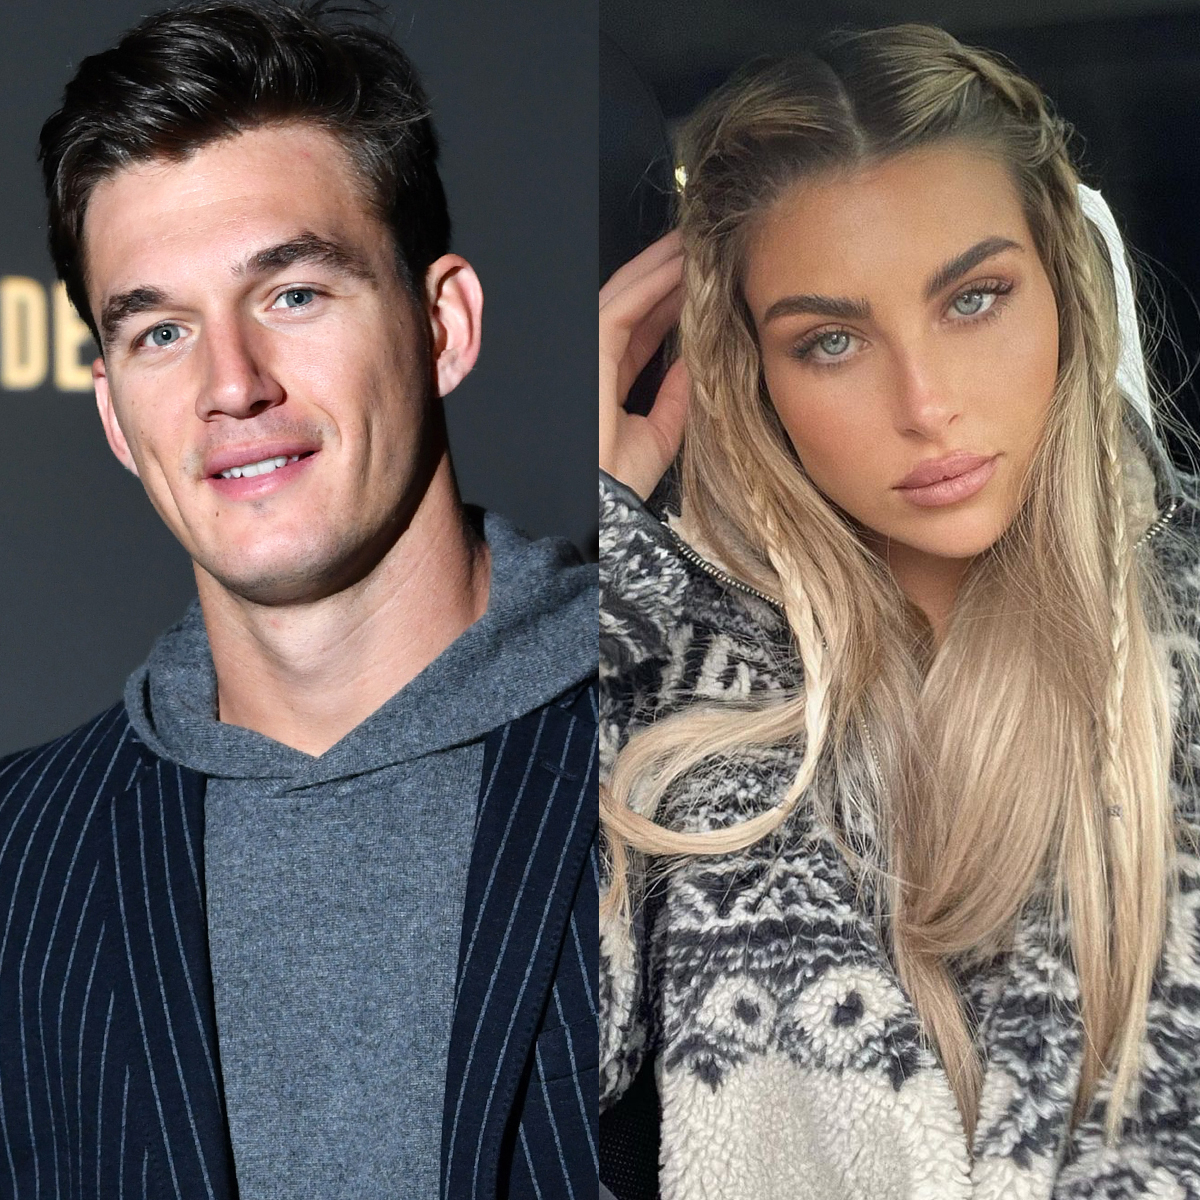 Bachelor Nation’s Tyler Cameron Is Dating Model Paige Lorenze